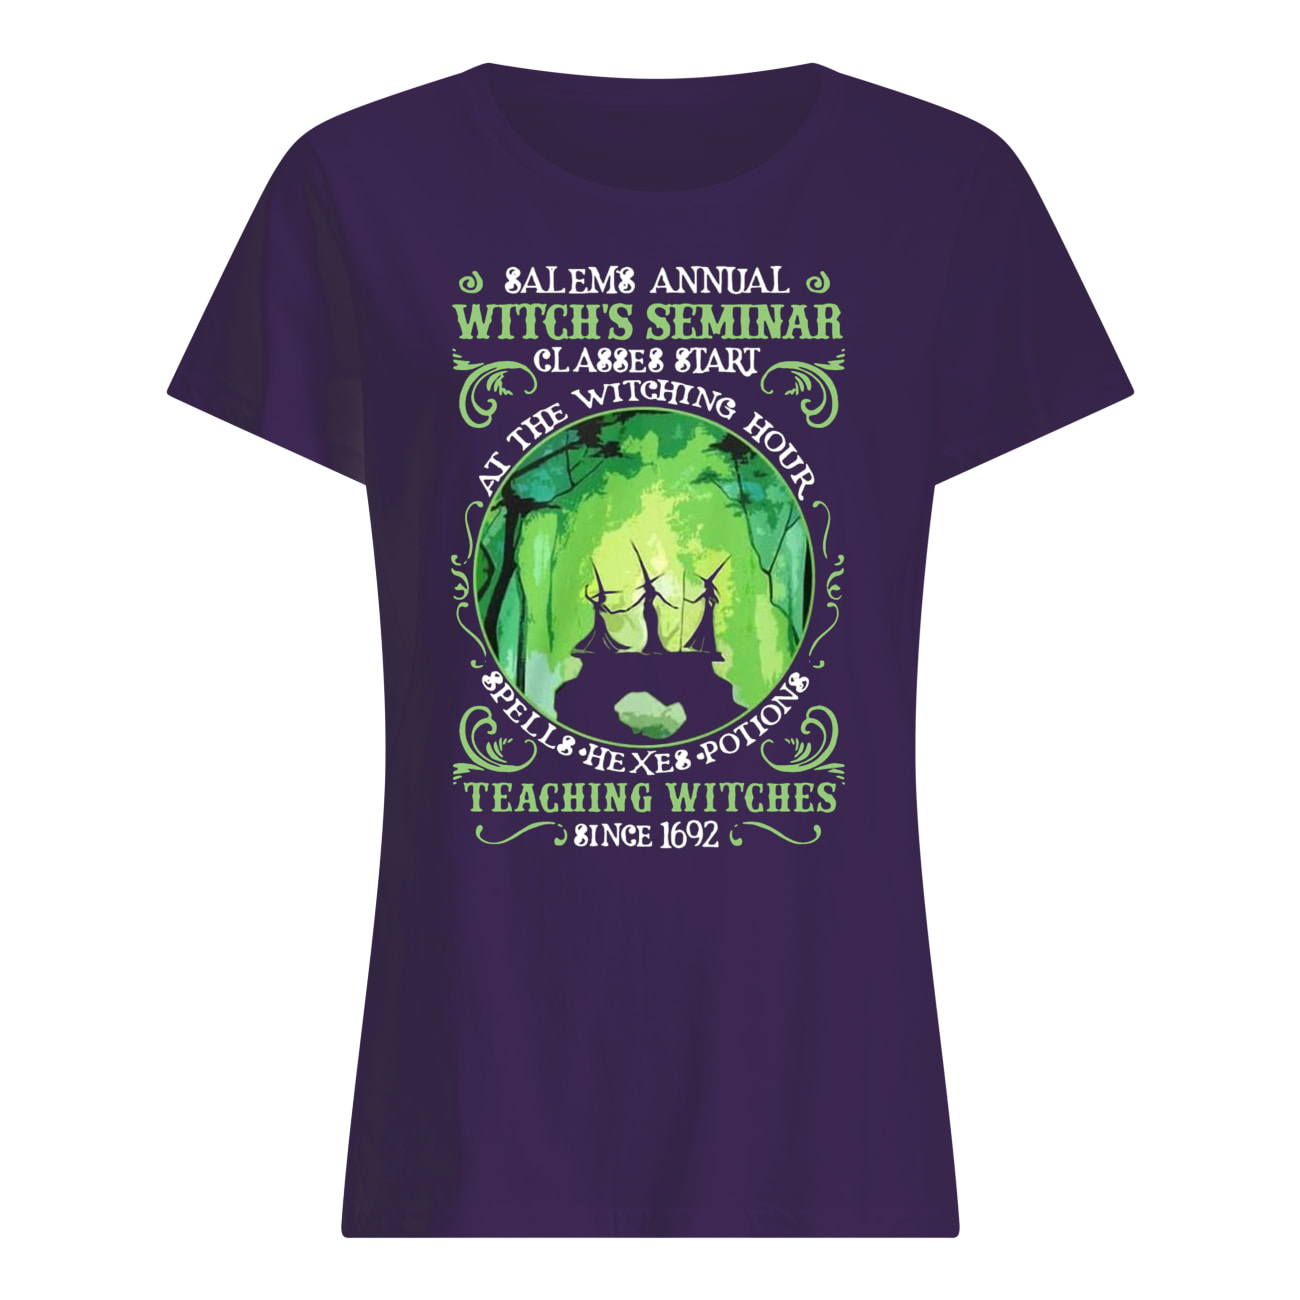 Salem annual witch seminar classes start at the witching hour spells hexes potions teaching witches sine 1692 womens shirt